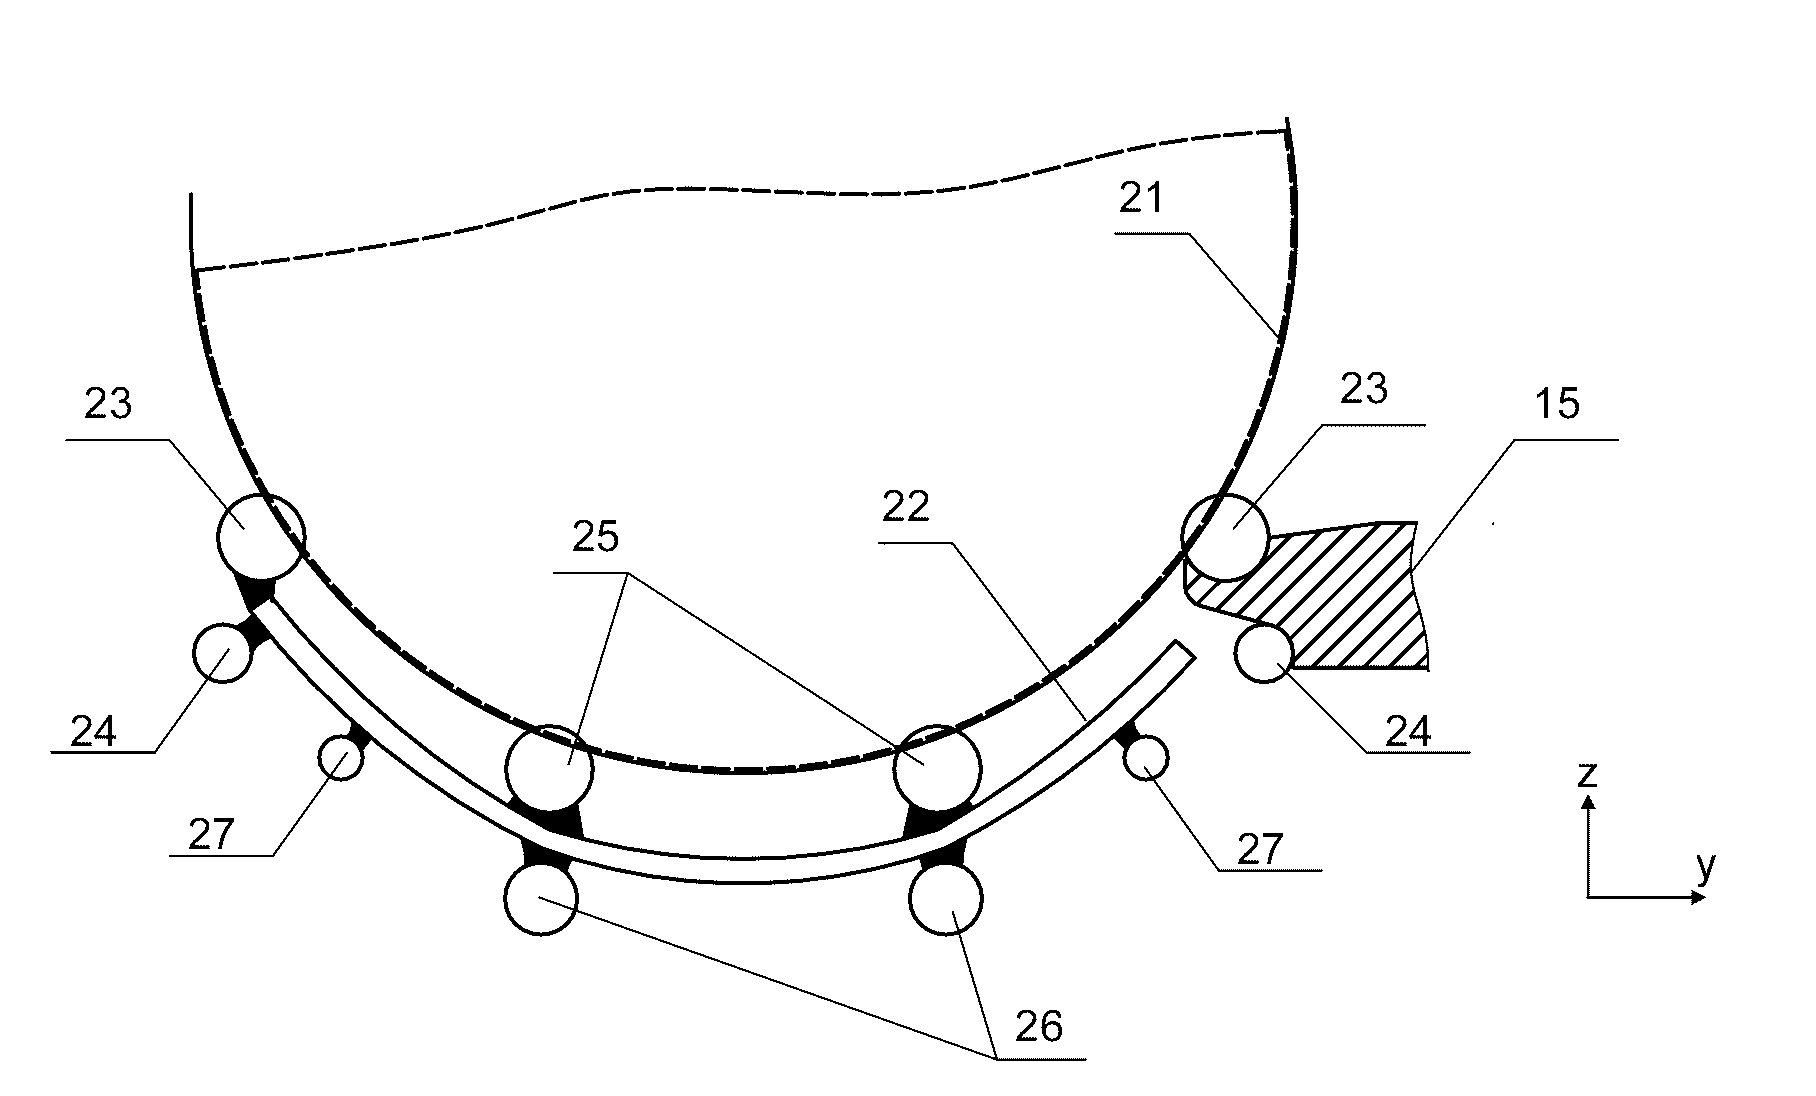 Crystal boat and crystal boat transfer device and wafer transfer system containing crystal boat and crystal boat transfer device